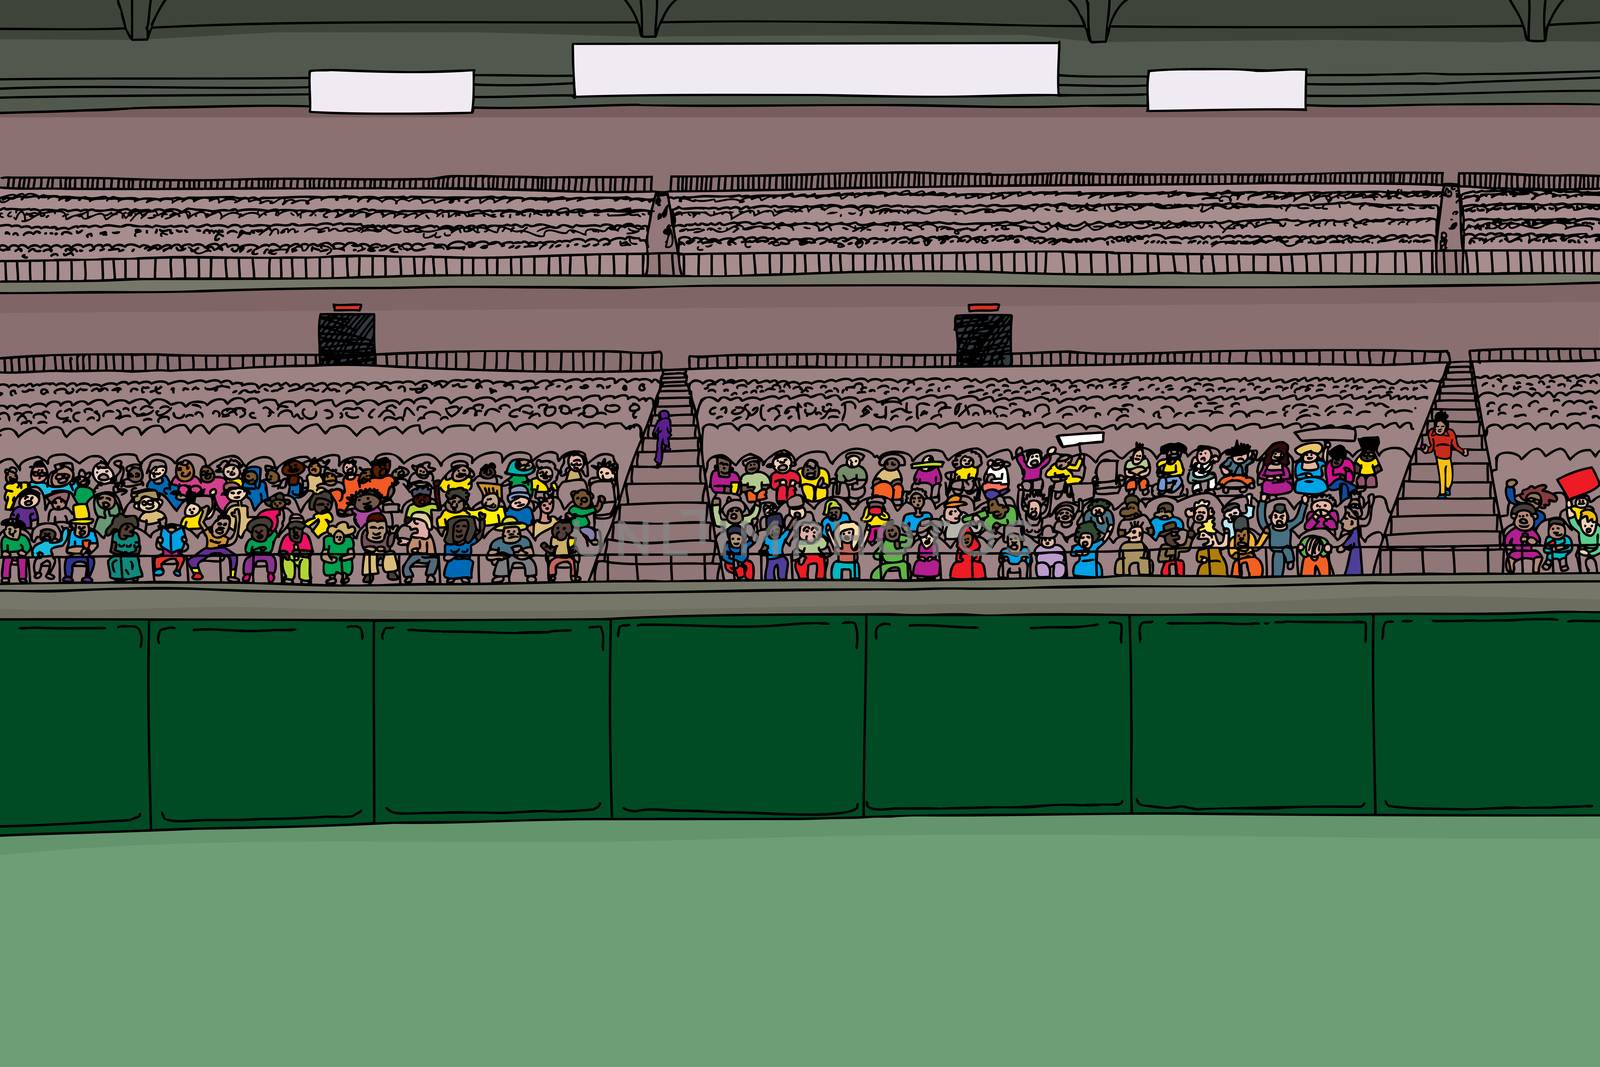 Large Group of Spectators in Stadium by TheBlackRhino